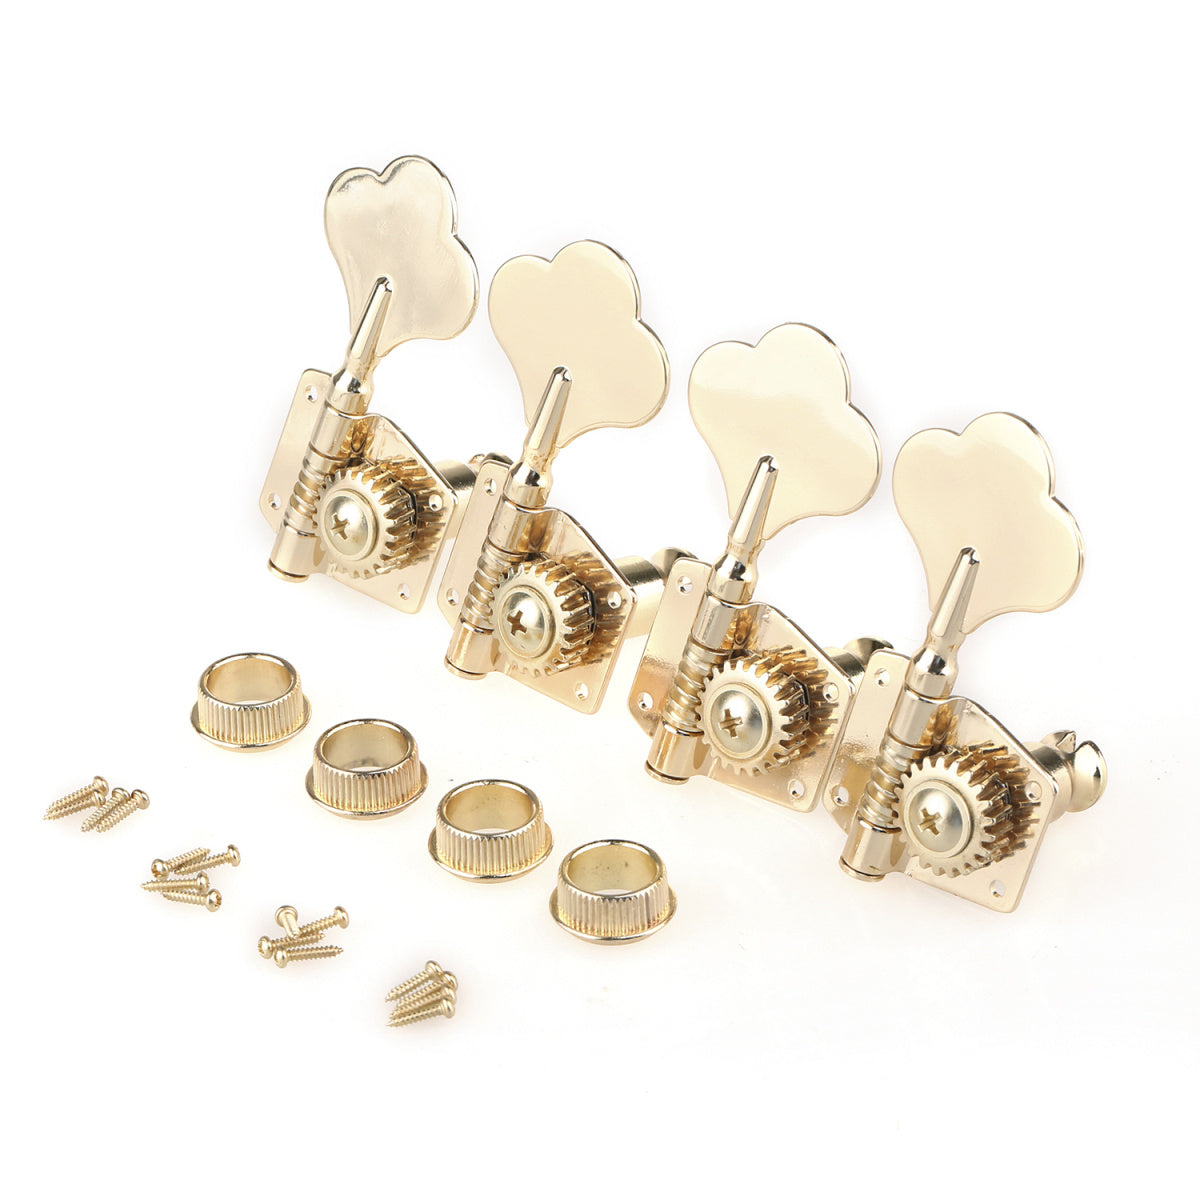 Musiclily Pro 4 In Line Open Gear Electric Bass Tuners Machine Heads Tuning Keys Pegs for Precision Jazz Bass, Gold